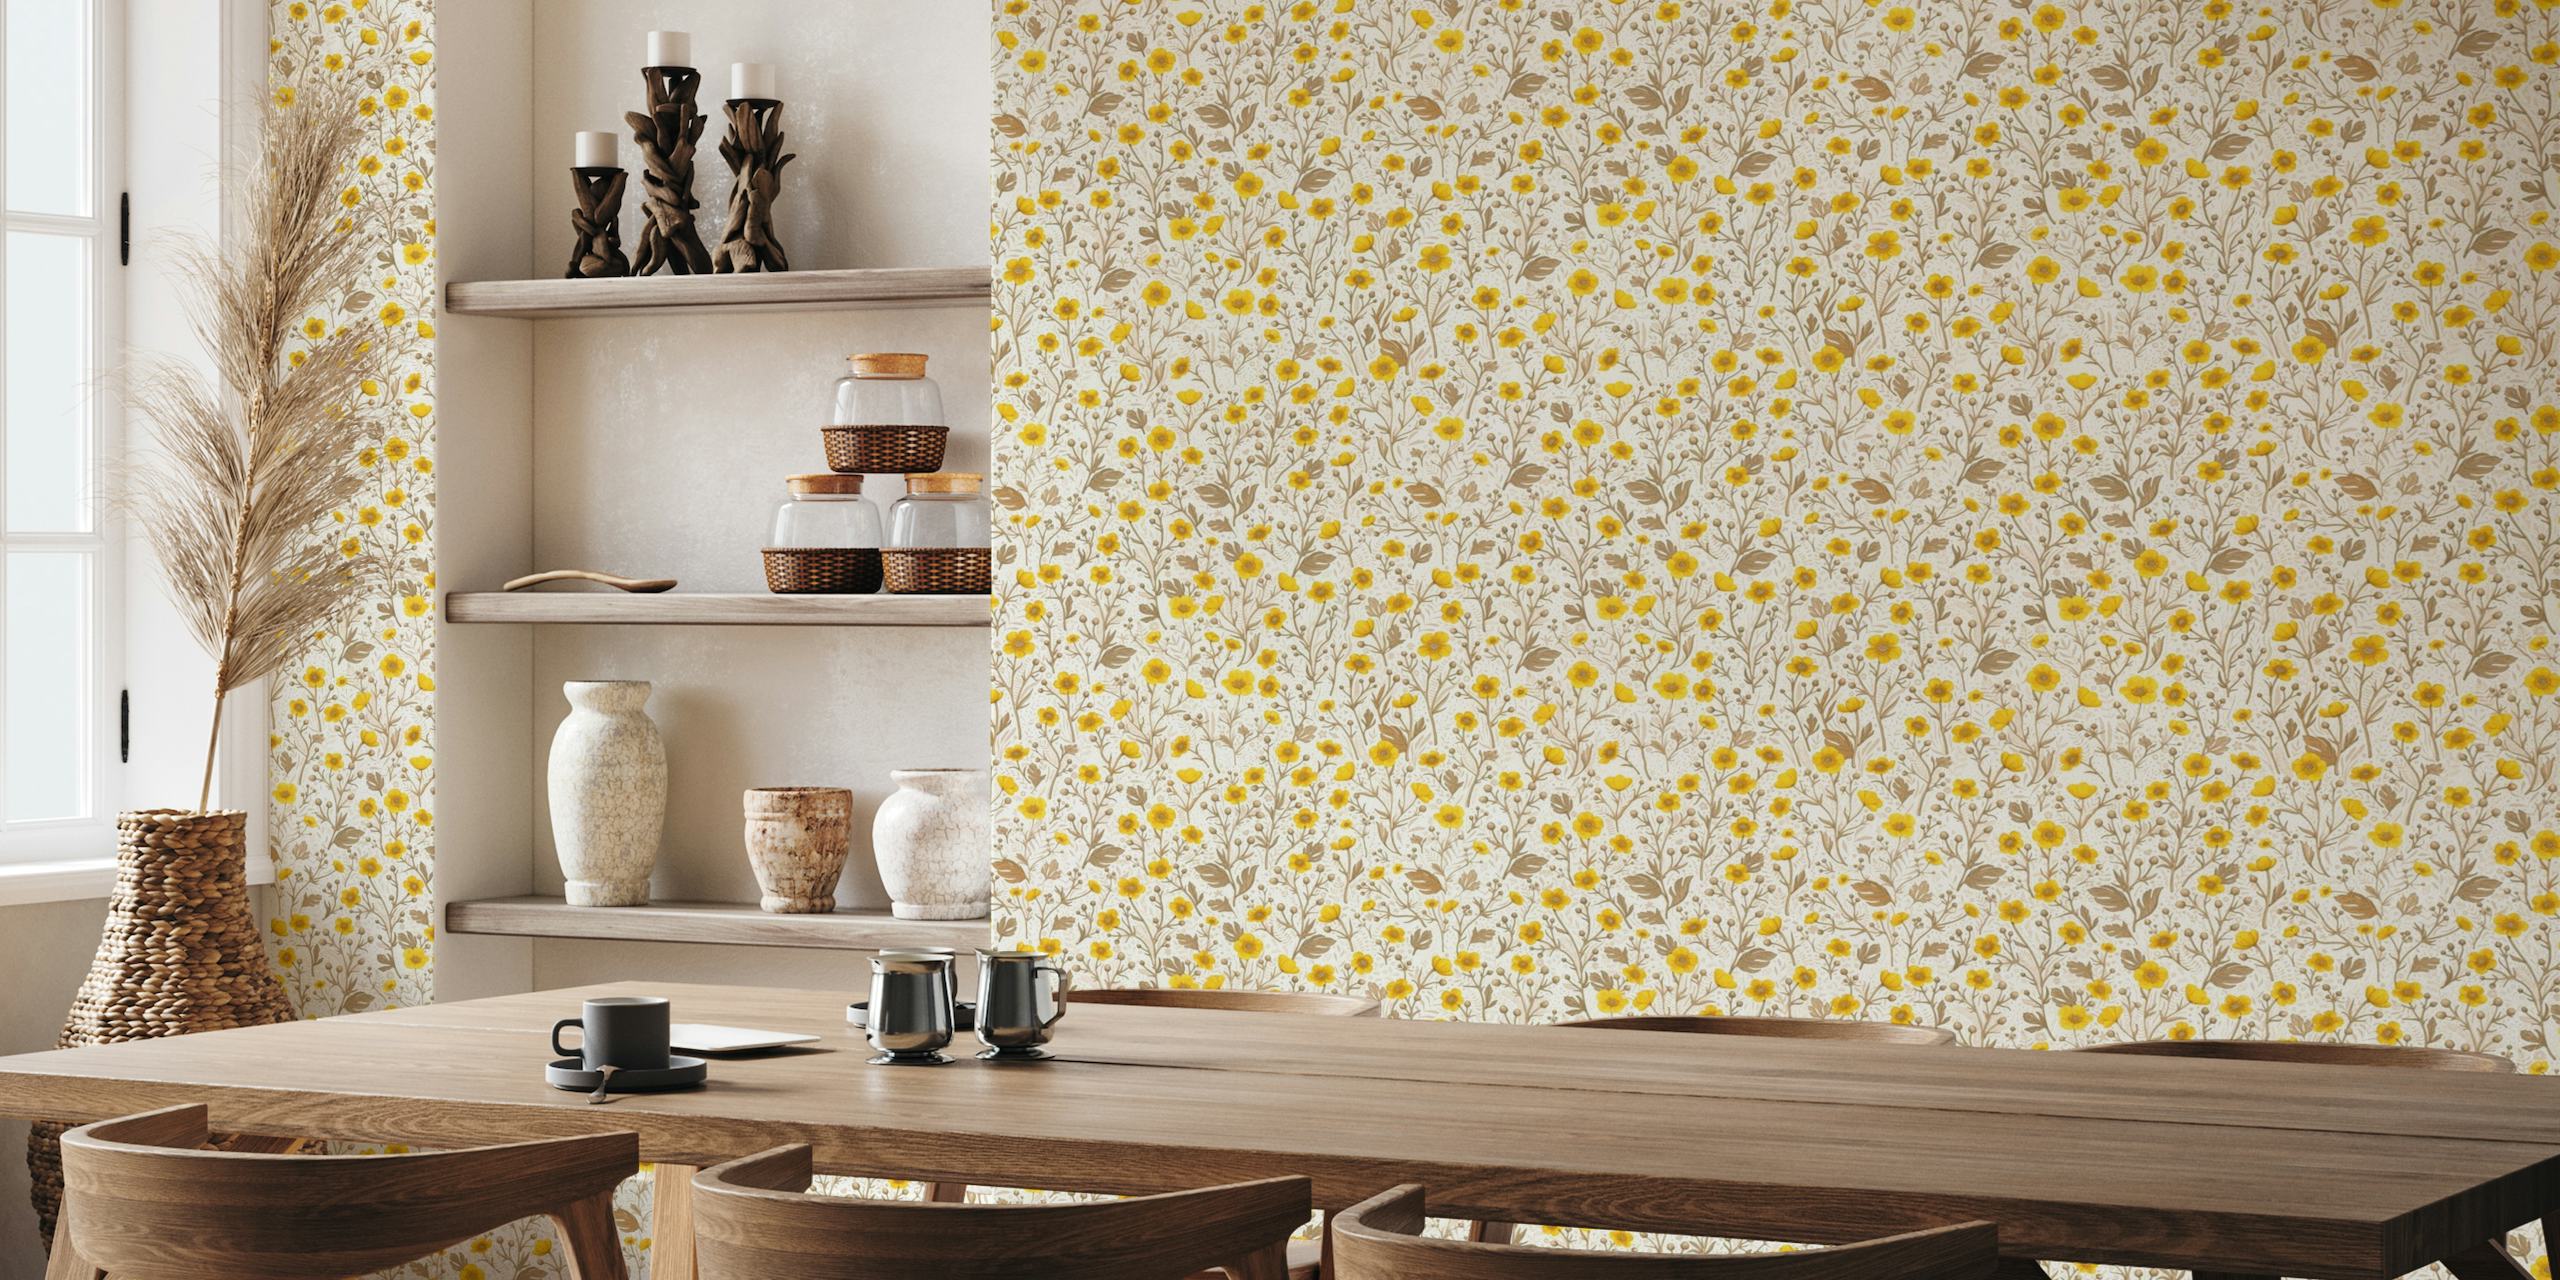 Buttercups, yellow and brown wallpaper